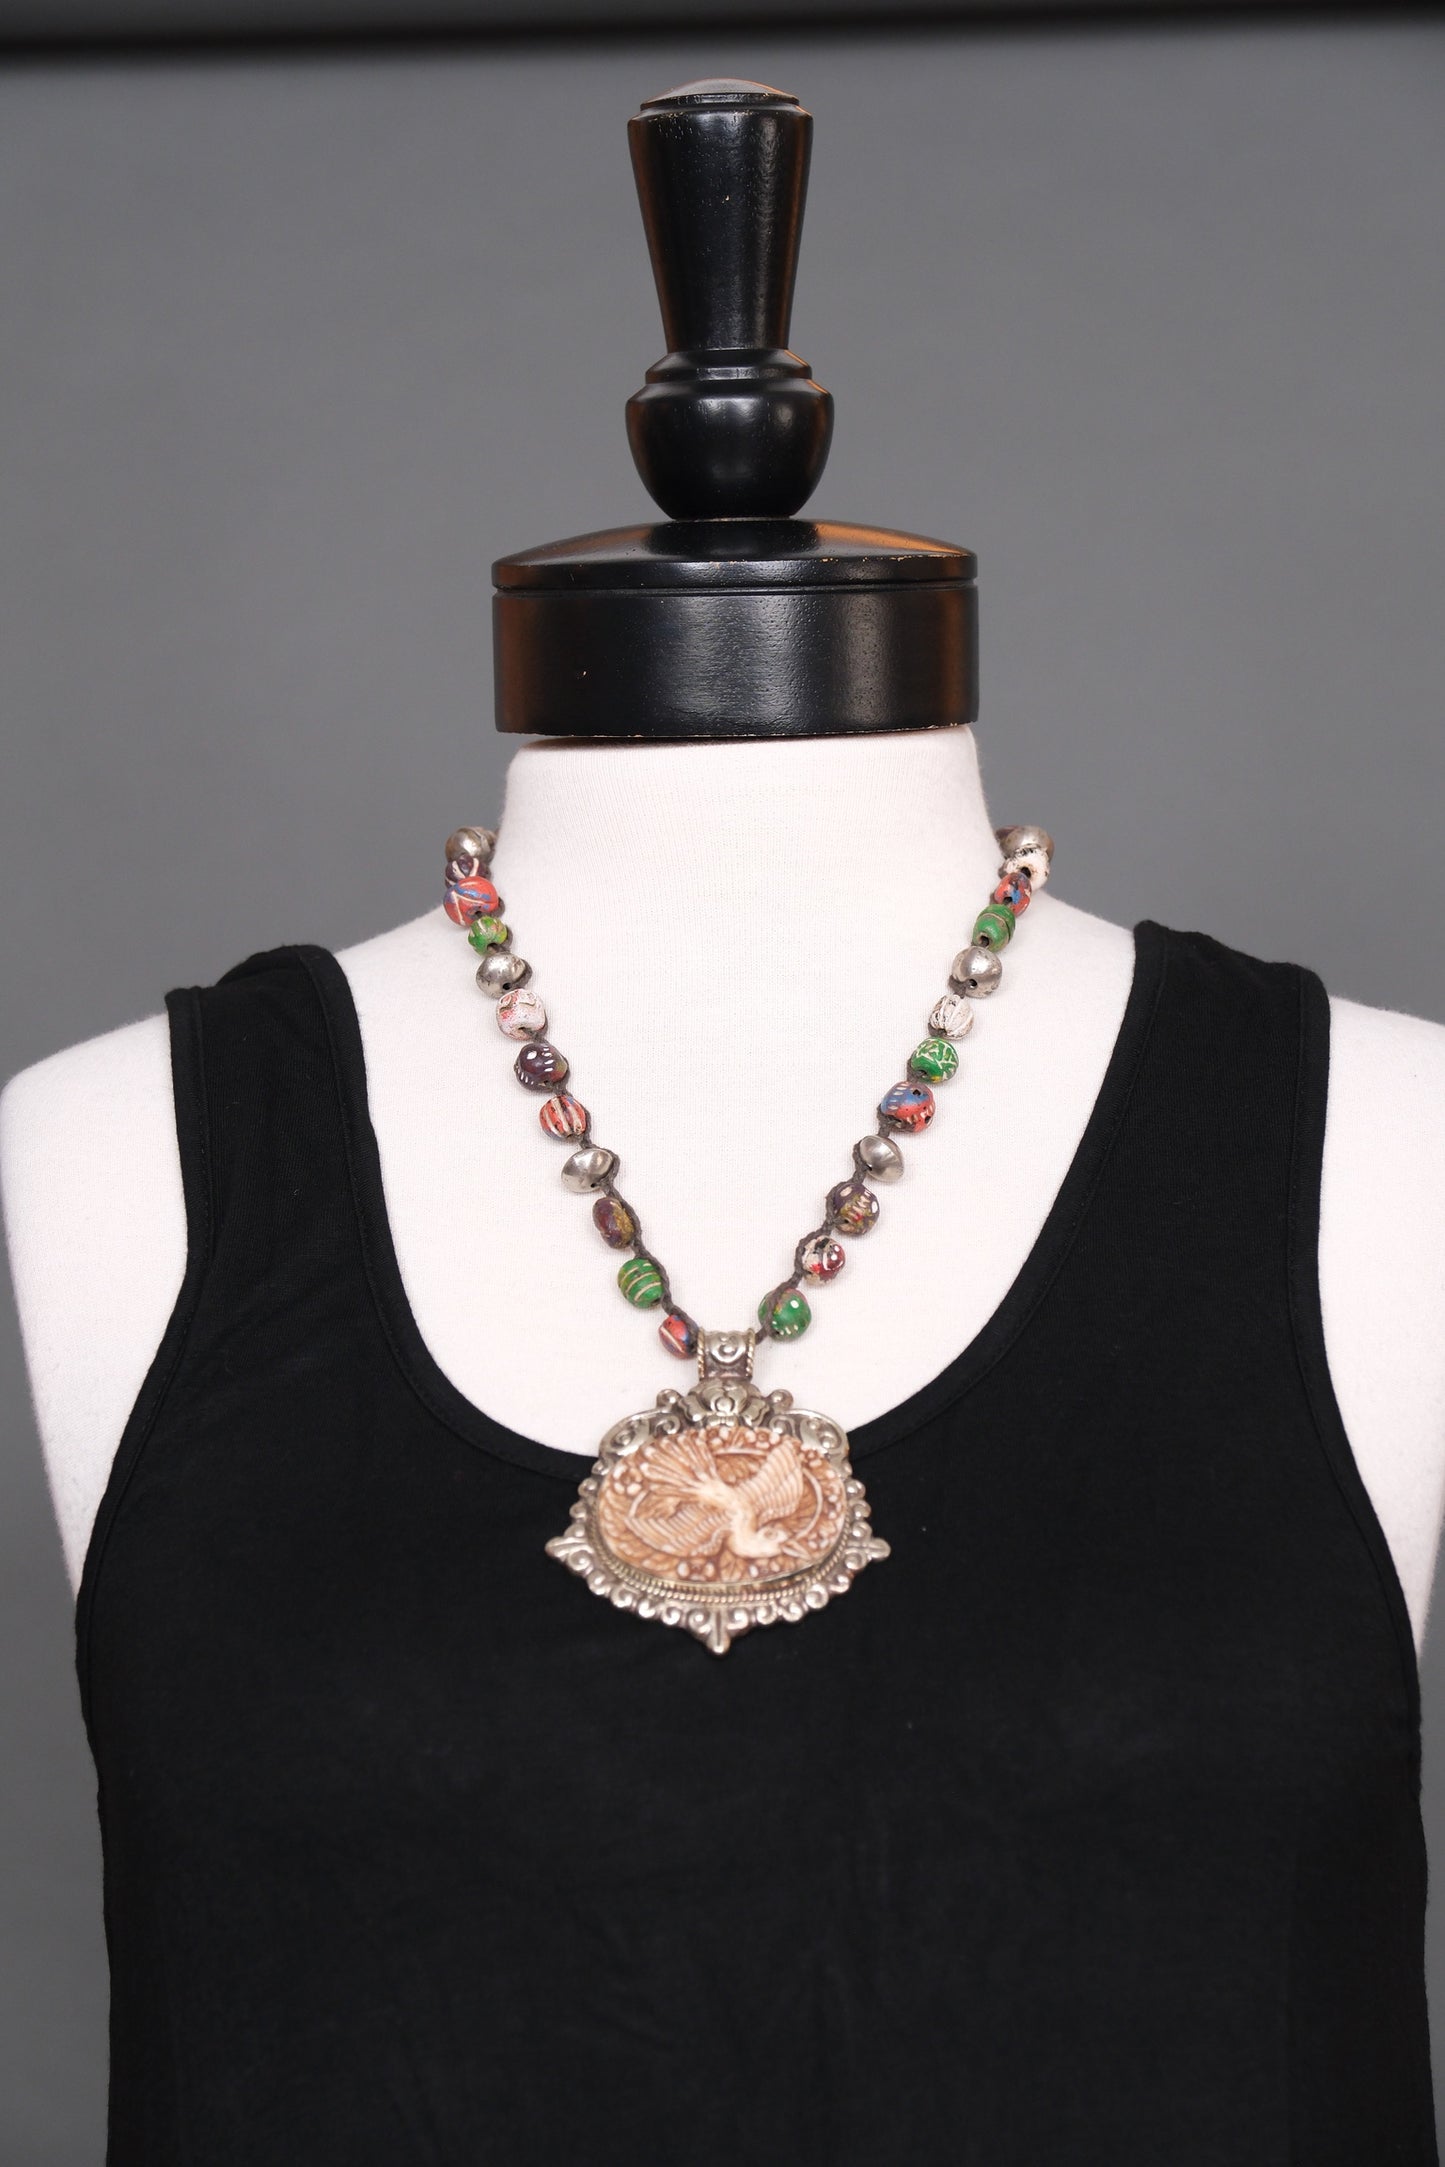 Bird Pendent Necklace with Ceramic Beads